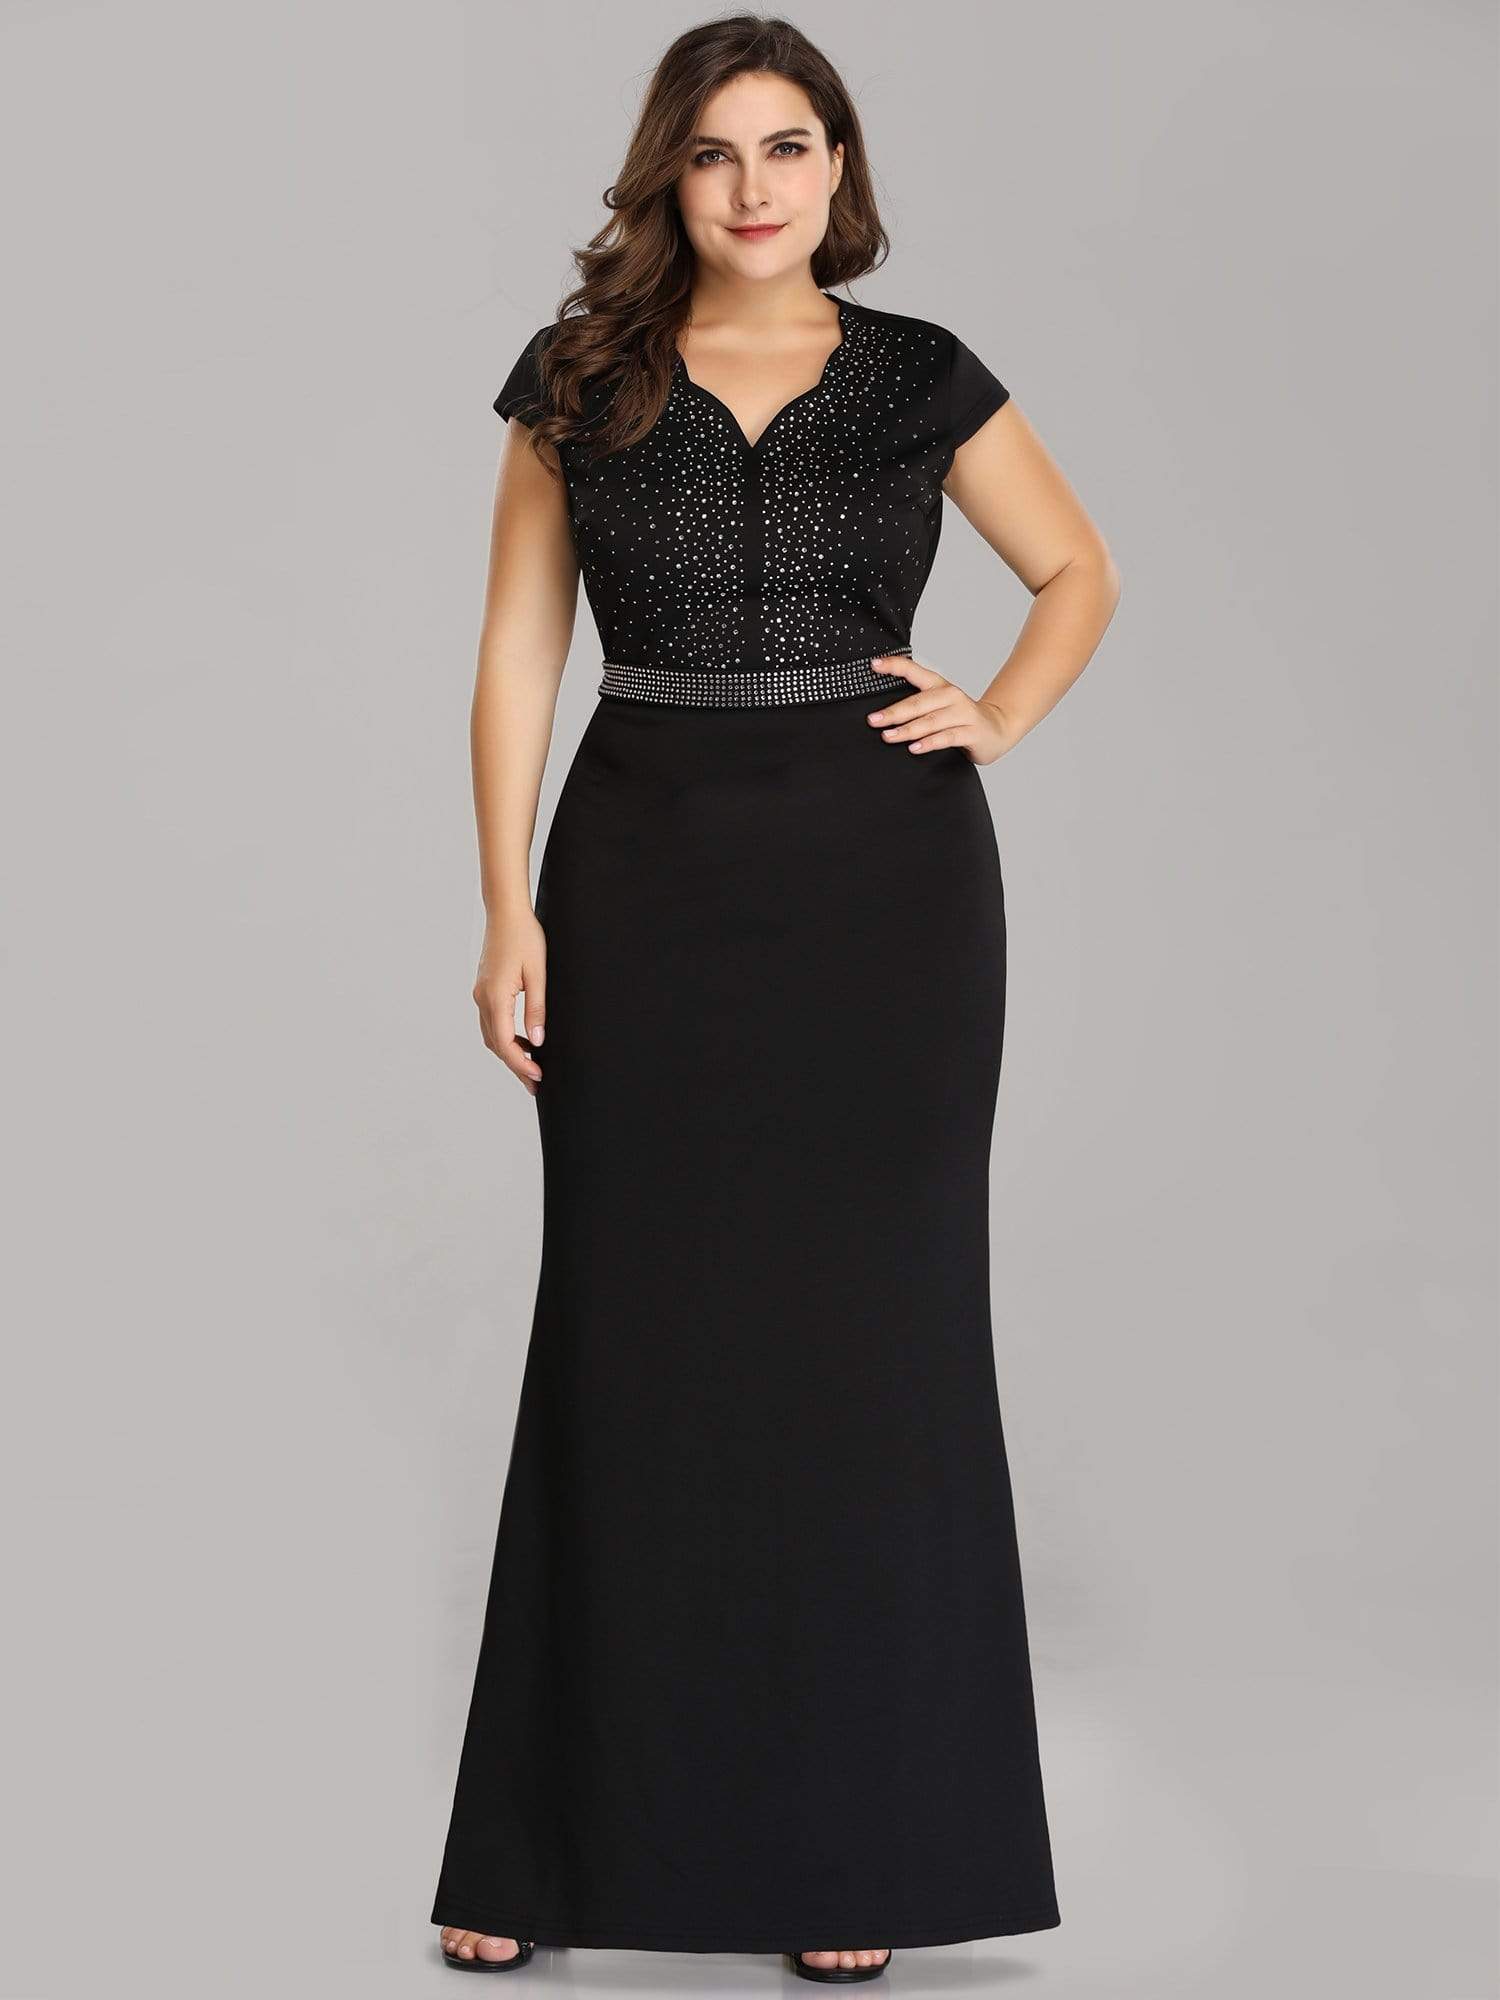 Sparkly Rhinestone Print Plus Size Evening Gowns With Cap Sleeve